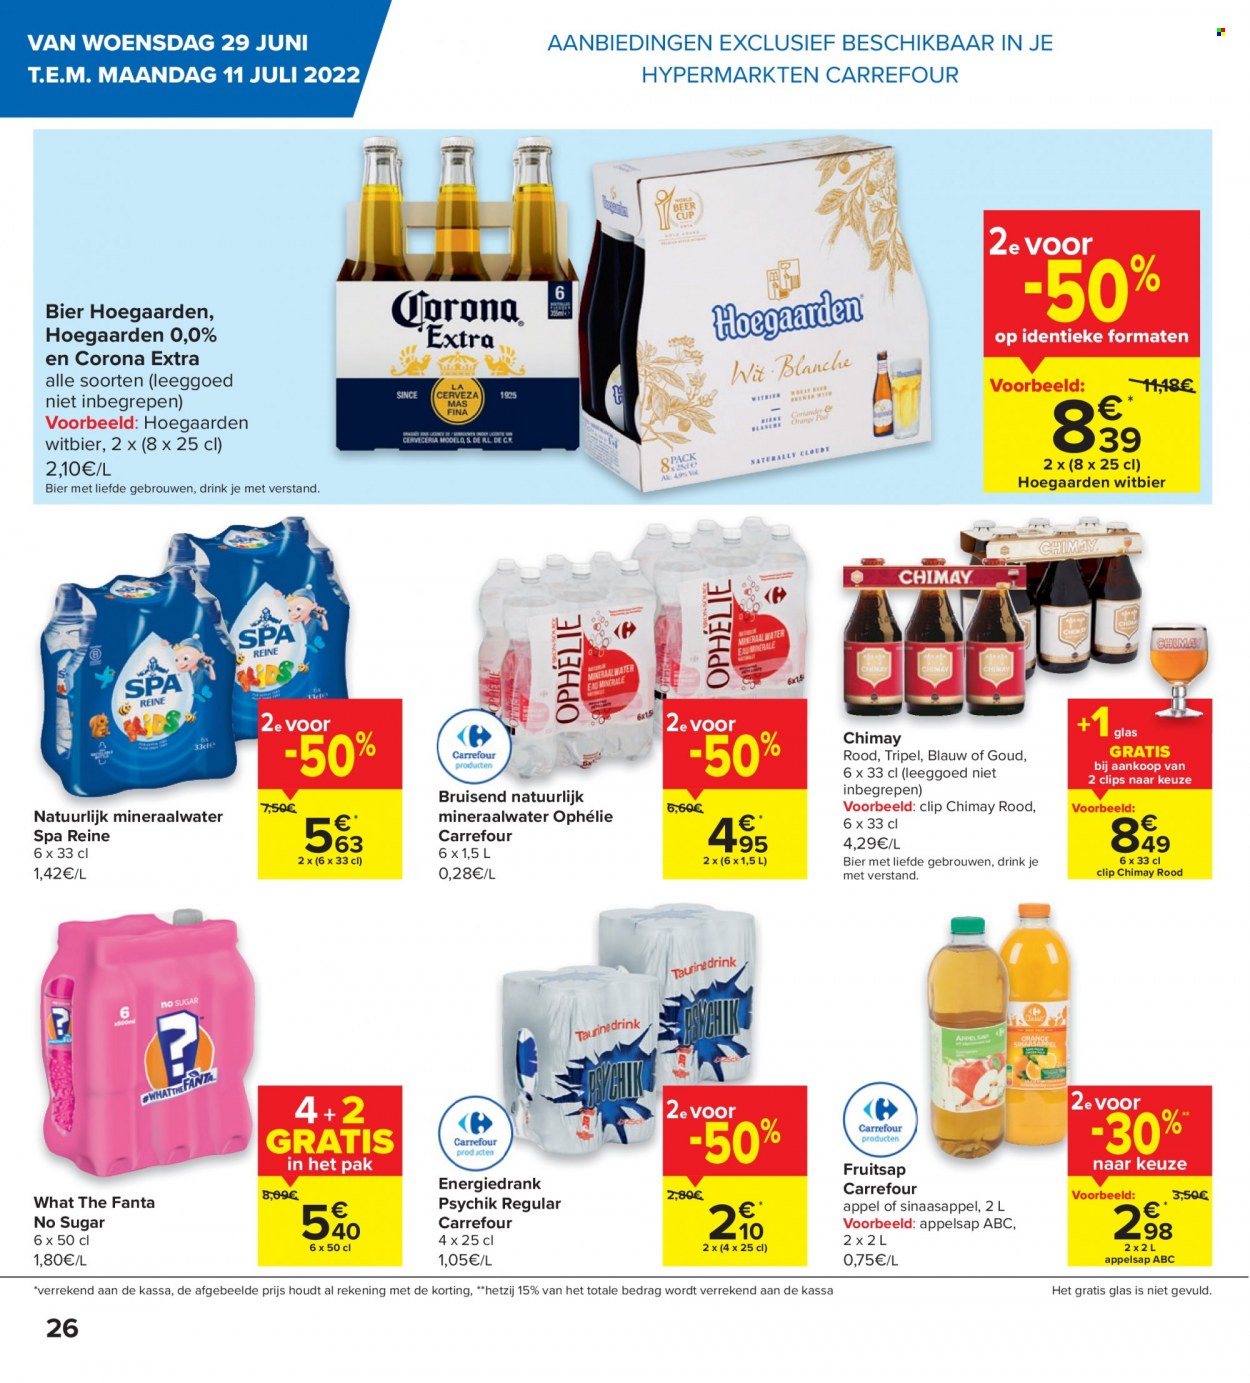 Catalogue Carrefour hypermarkt - 29.6.2022 - 11.7.2022. Page 6.